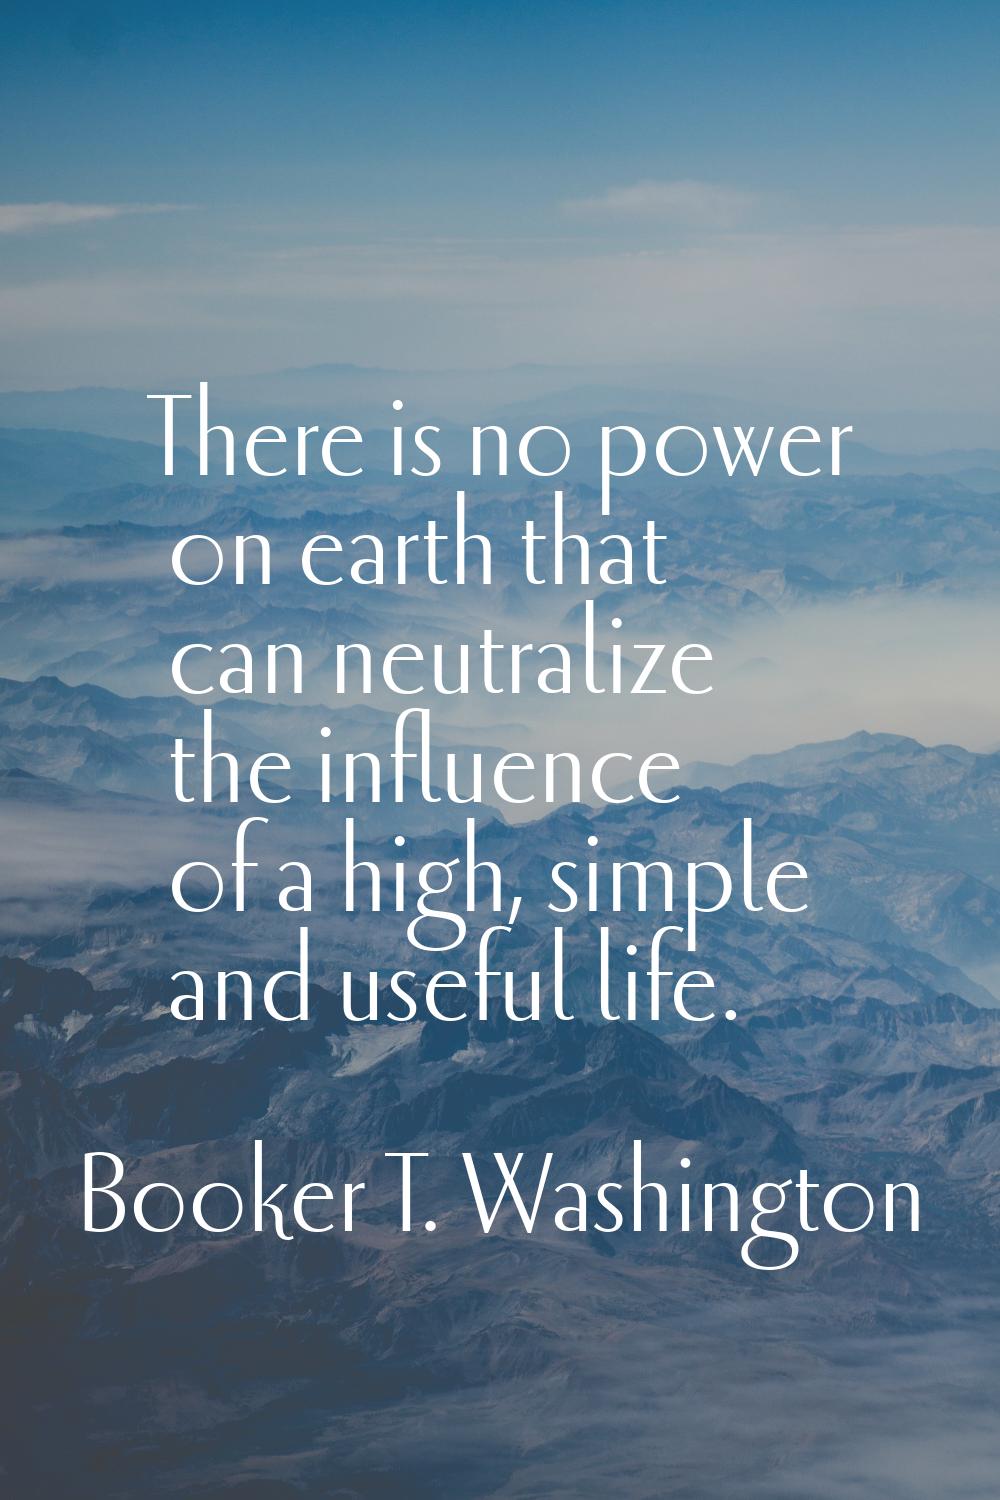 There is no power on earth that can neutralize the influence of a high, simple and useful life.